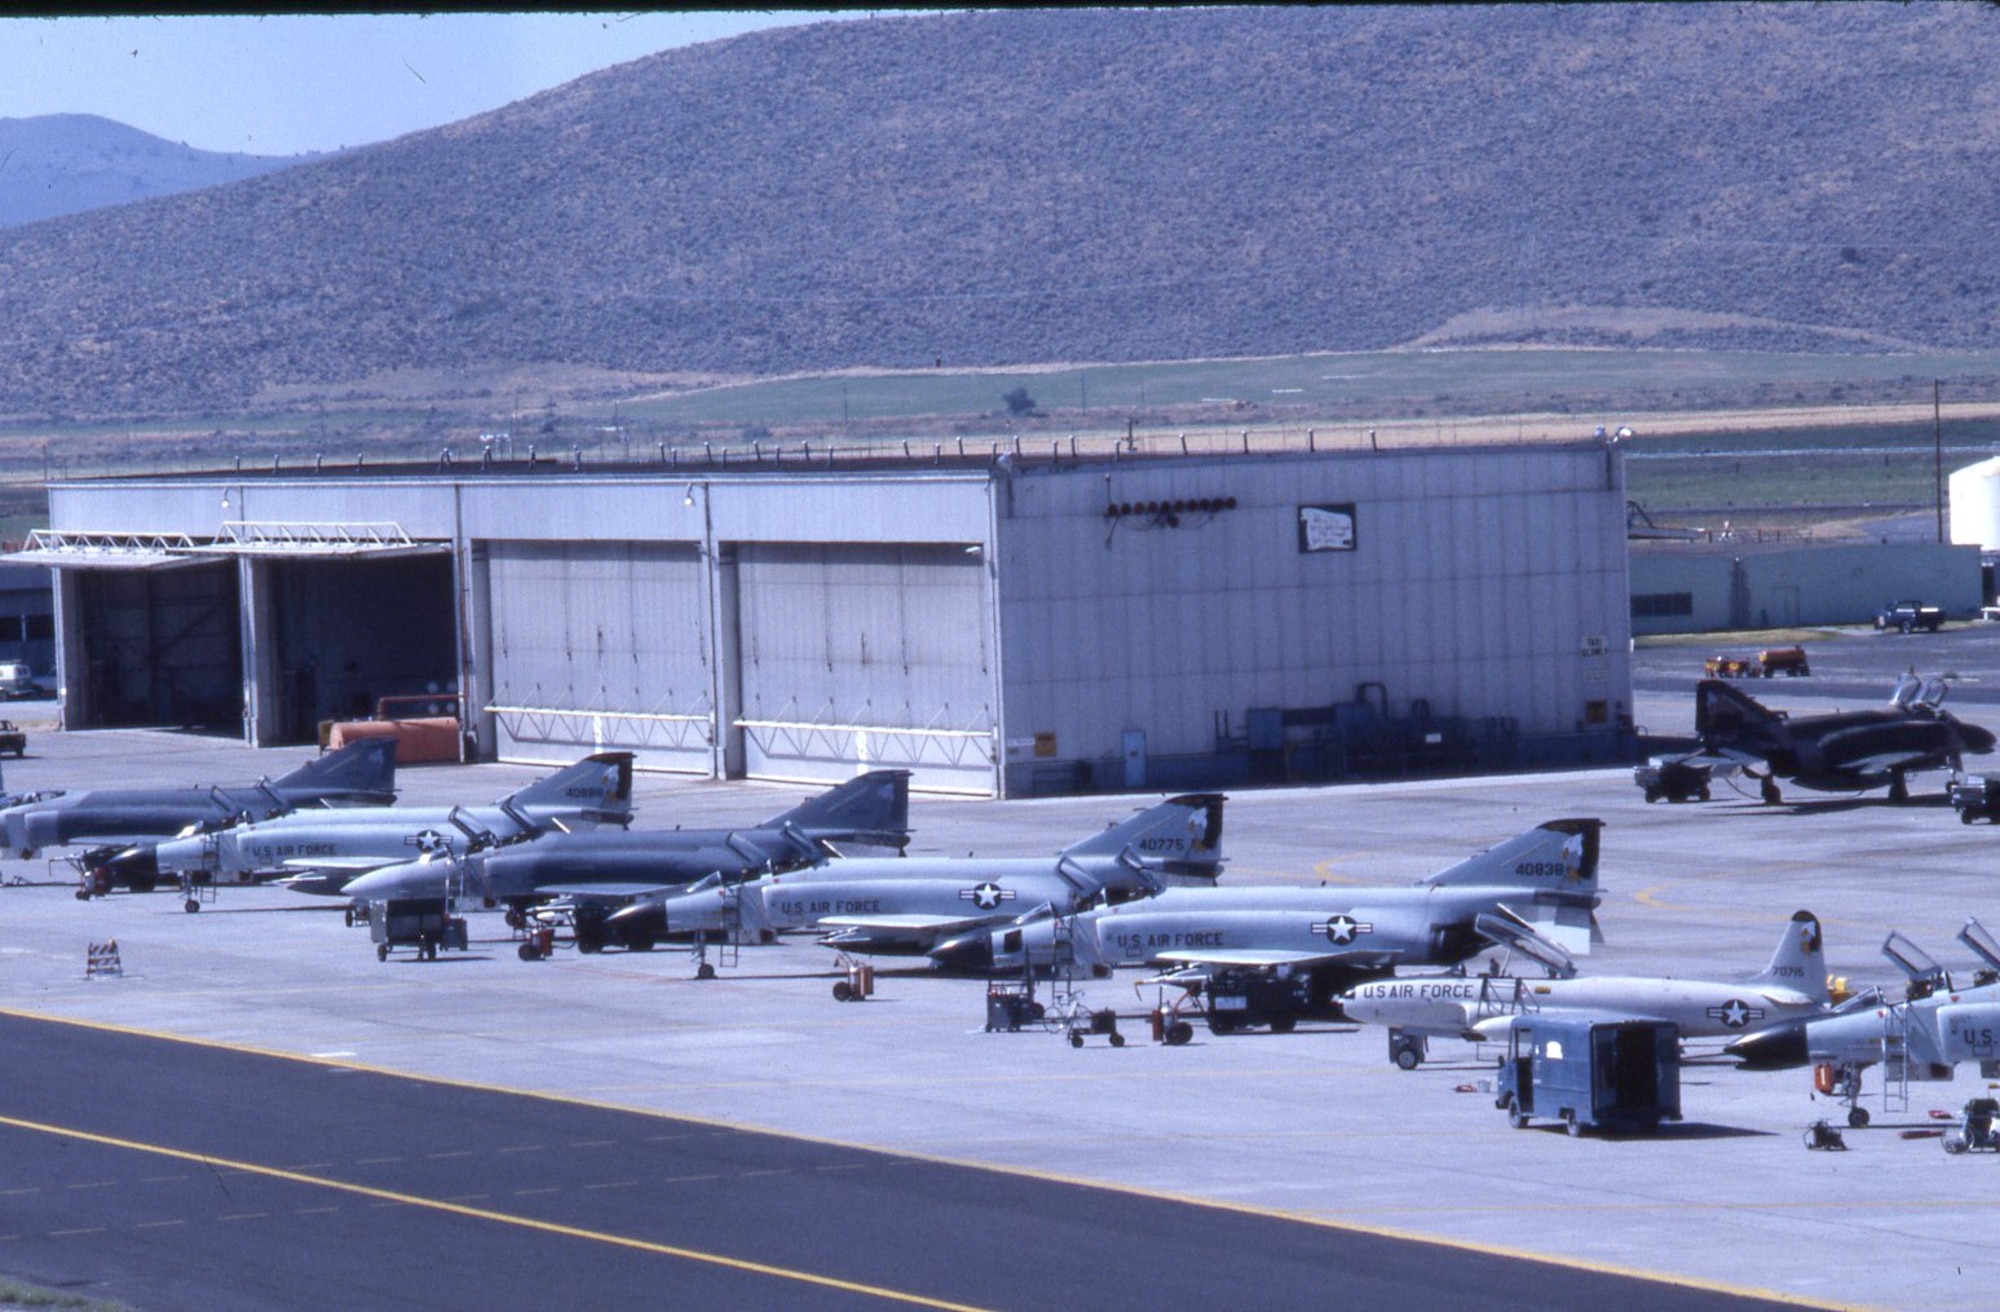 Members of the 114th Tactical Fighter Training Squadron prepare the F-4 Phantoms for a training mission at Kingsley Field in Klamath Falls, Oregon in 1986.  An F-4 training schoolhouse for Air National Guard pilots and WSOS was opened at Kingsley Field in 1985. (U.S. Air National Guard file photo/released)